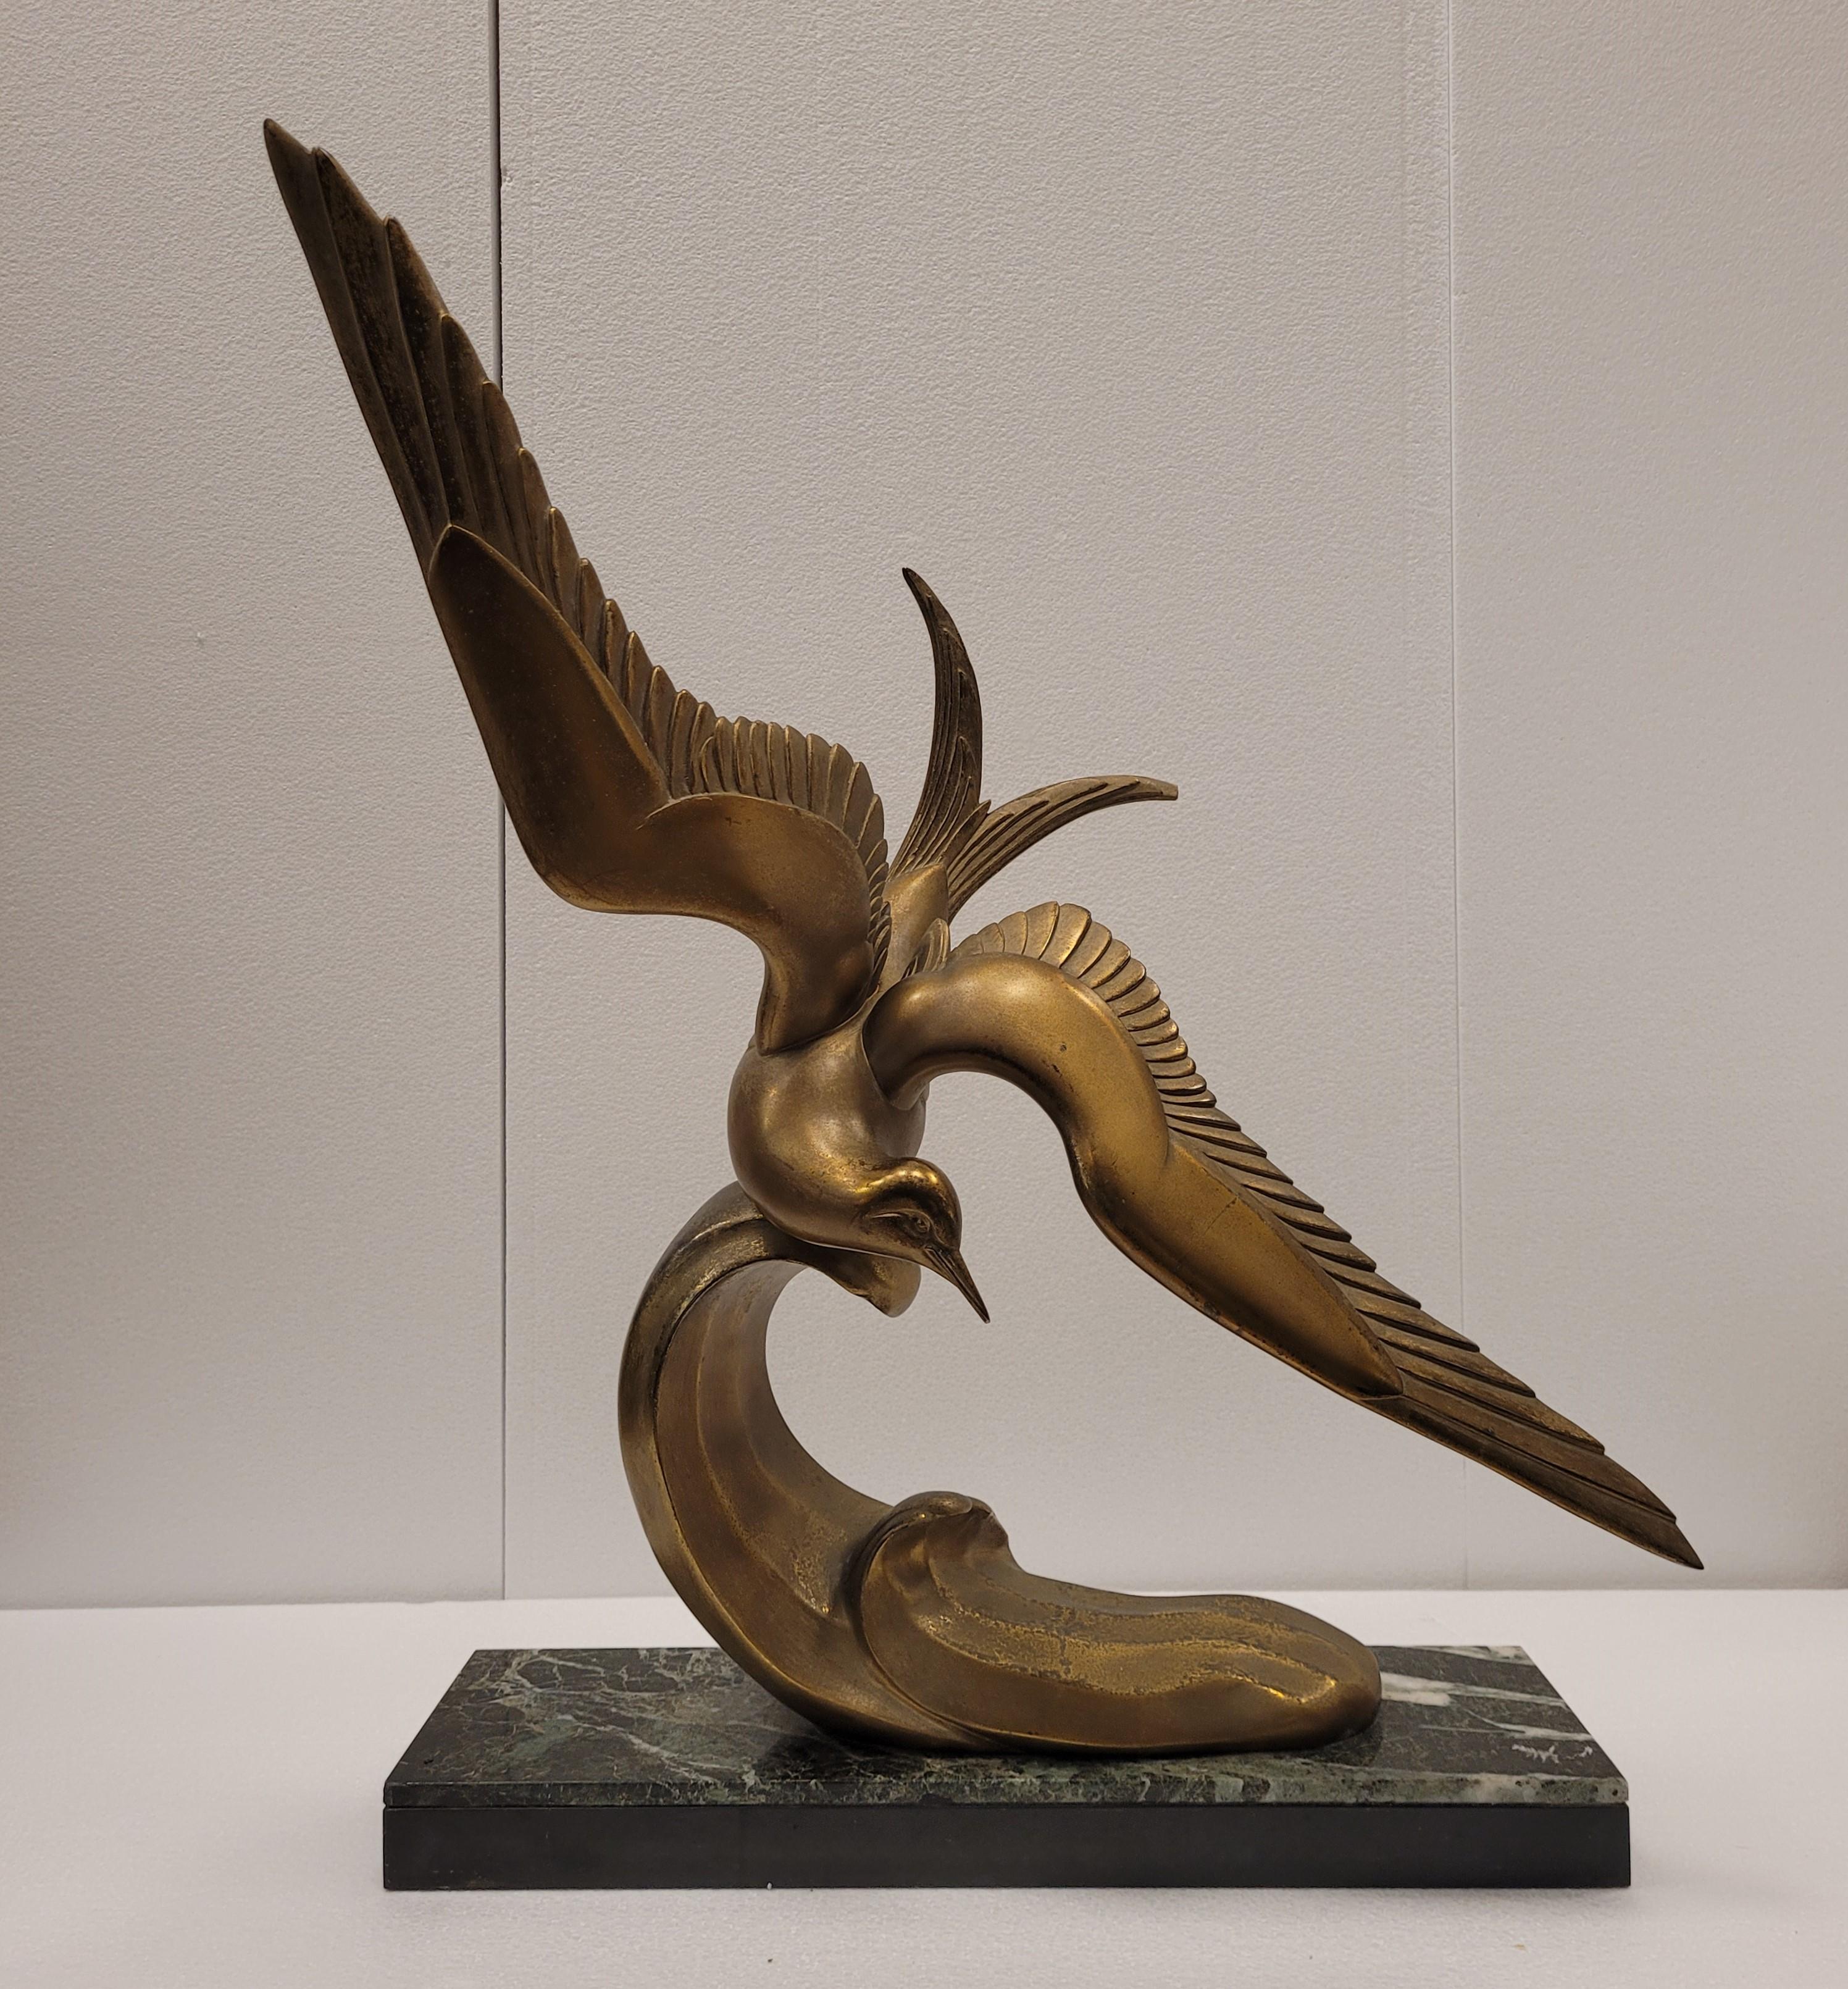 Irénée Rochard was a French decorative sculptor best known for his Art Nouveau-styled depictions of animals. Most often working in bronze, he also created several figurines in marble, ceramic, or wood. Rochard was fascinated by animals, and wished